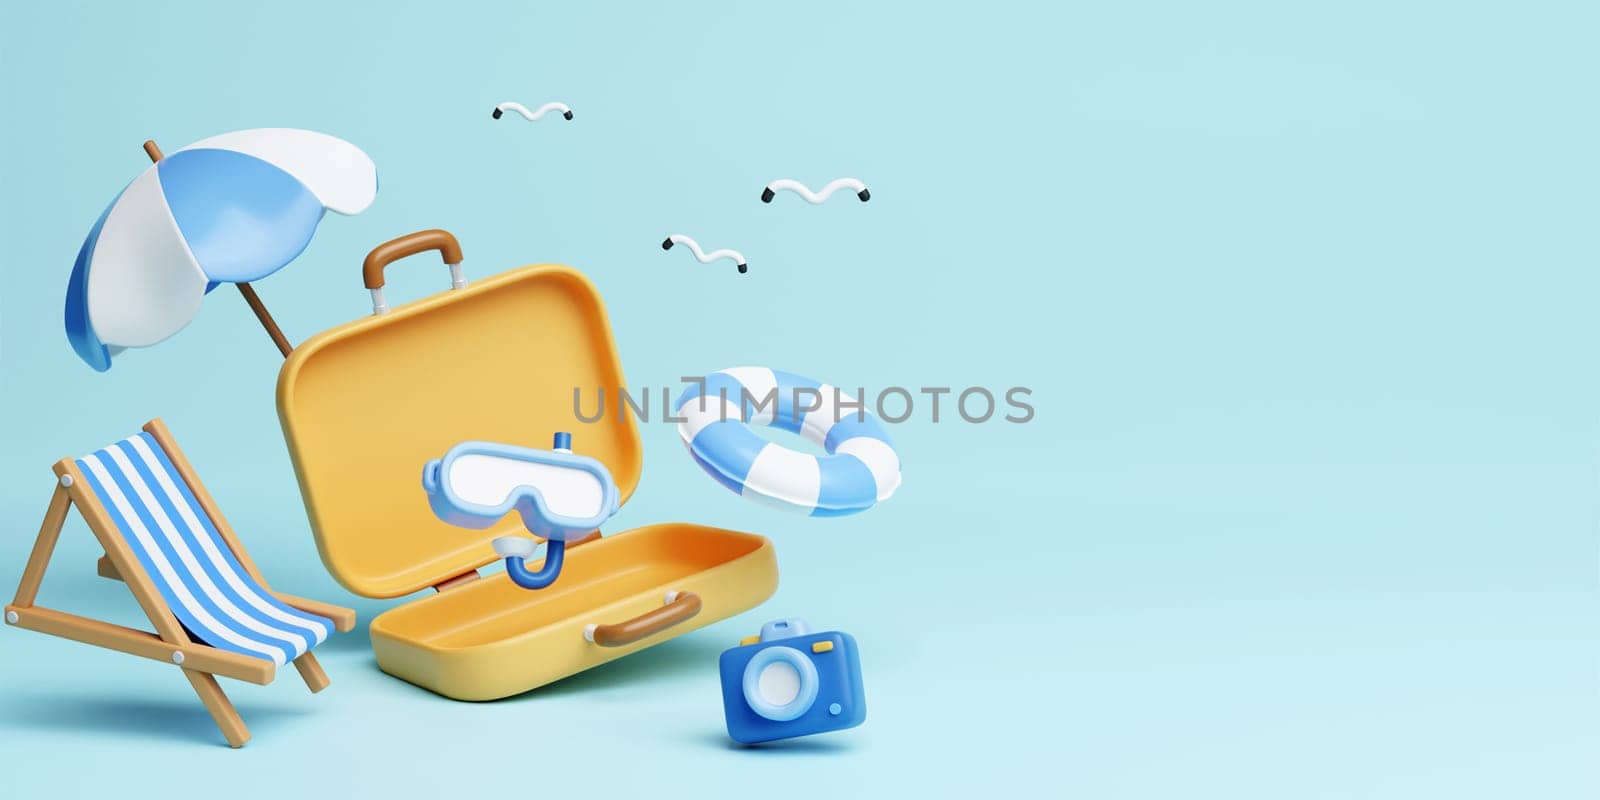 summer travel with yellow suitcase, beach chair, sunglasses ,camera, umbrella and diving goggle. Creative travel concept idea with copy space. illustration banner 3d rendering illustration by meepiangraphic